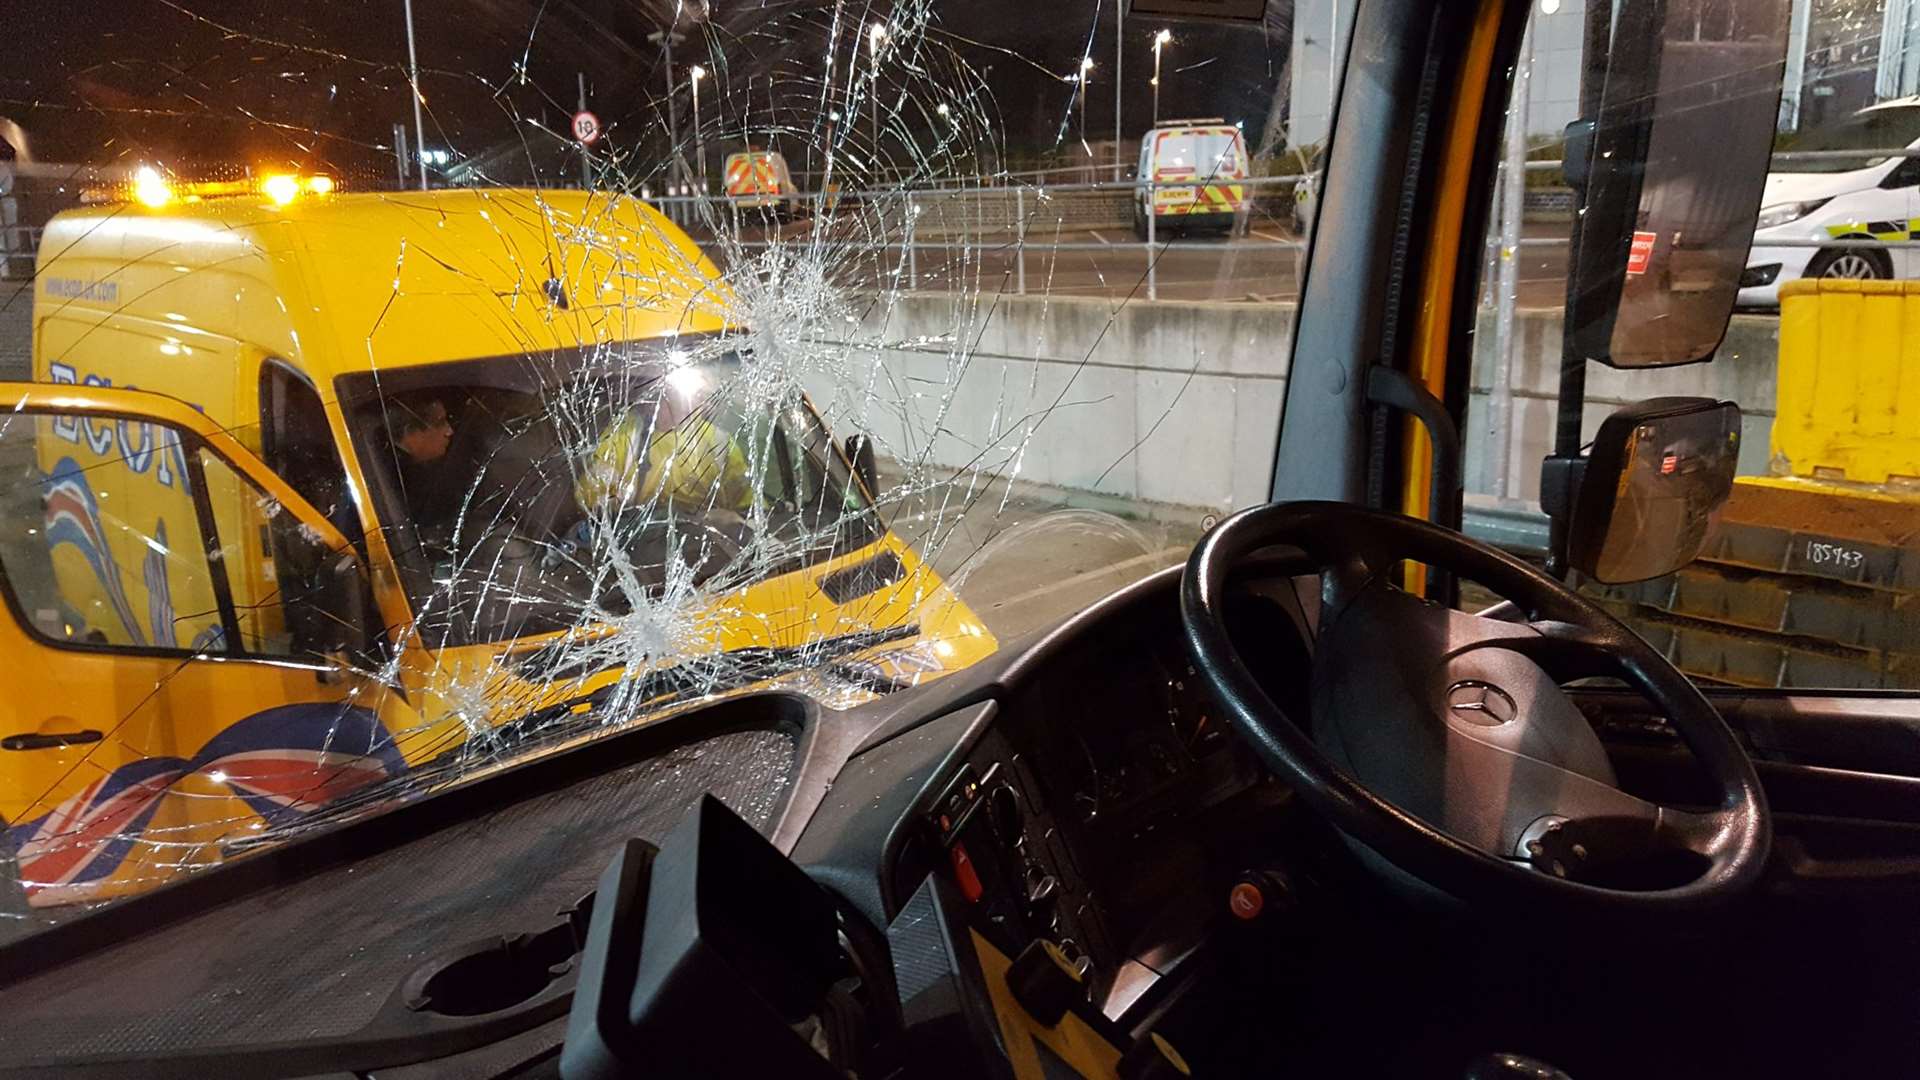 The windscreen was cracked in the incident. Picture: Gritting Kent